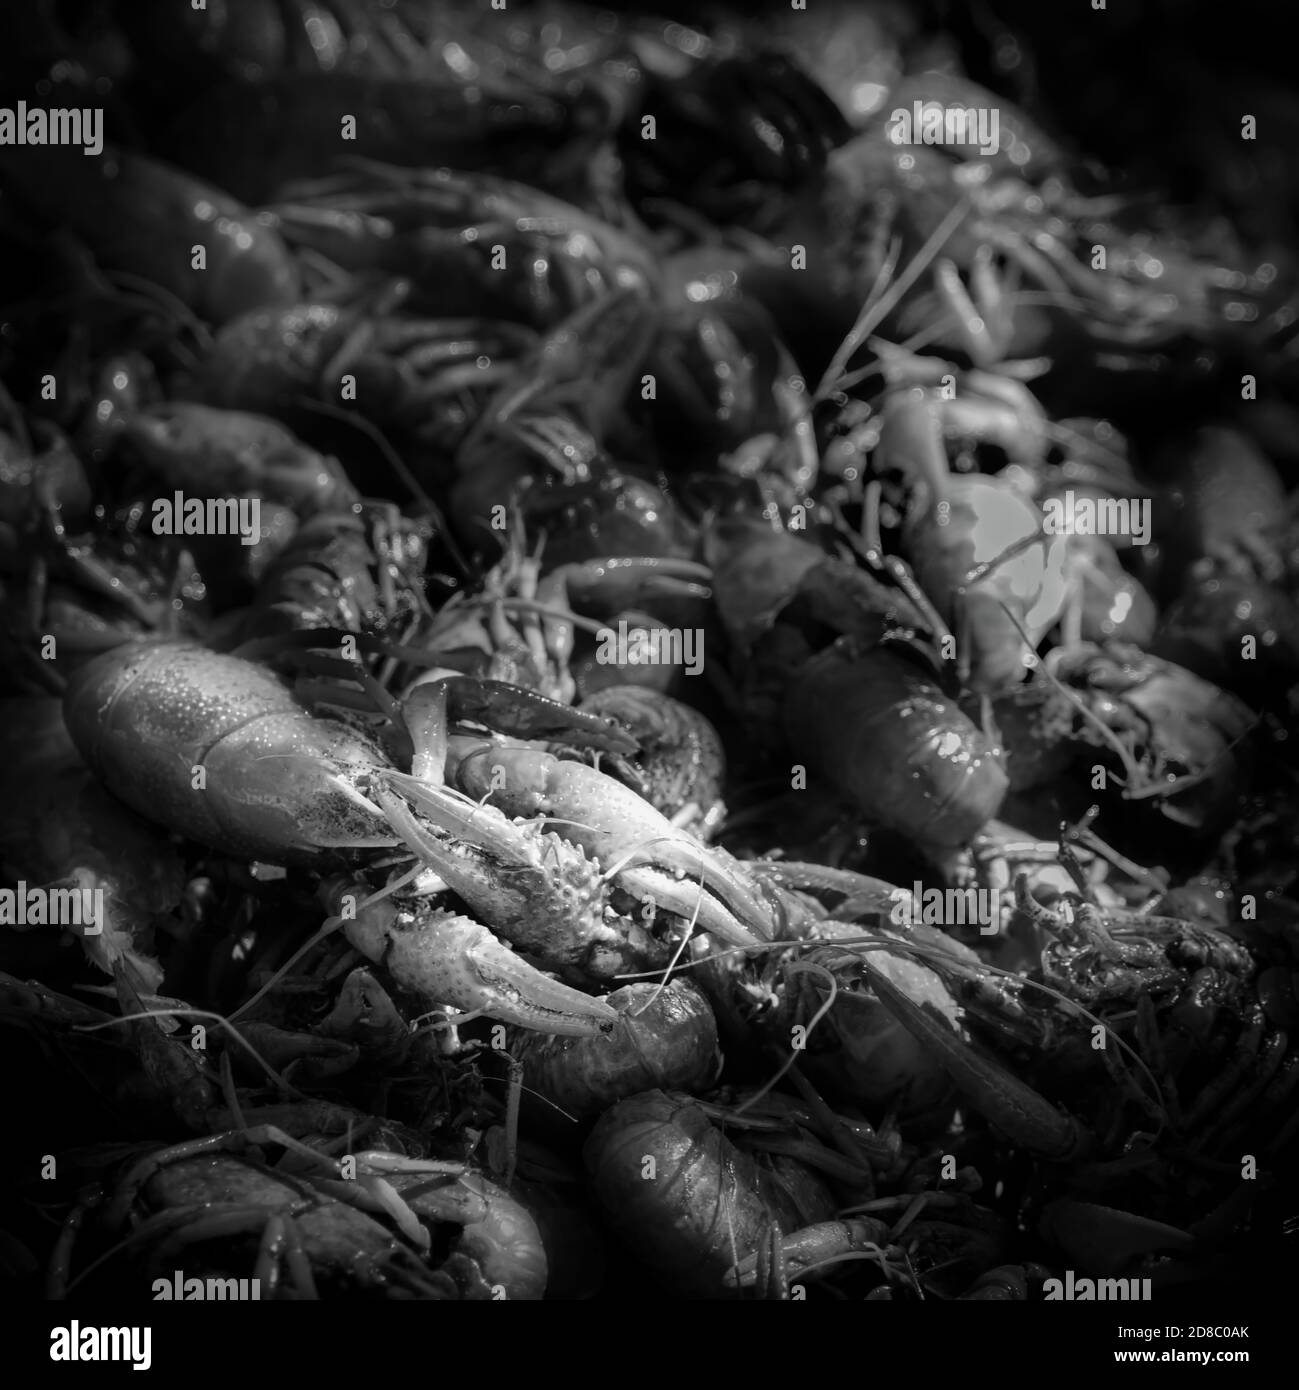 A crab boil sits on the table ready for eating. Stock Photo